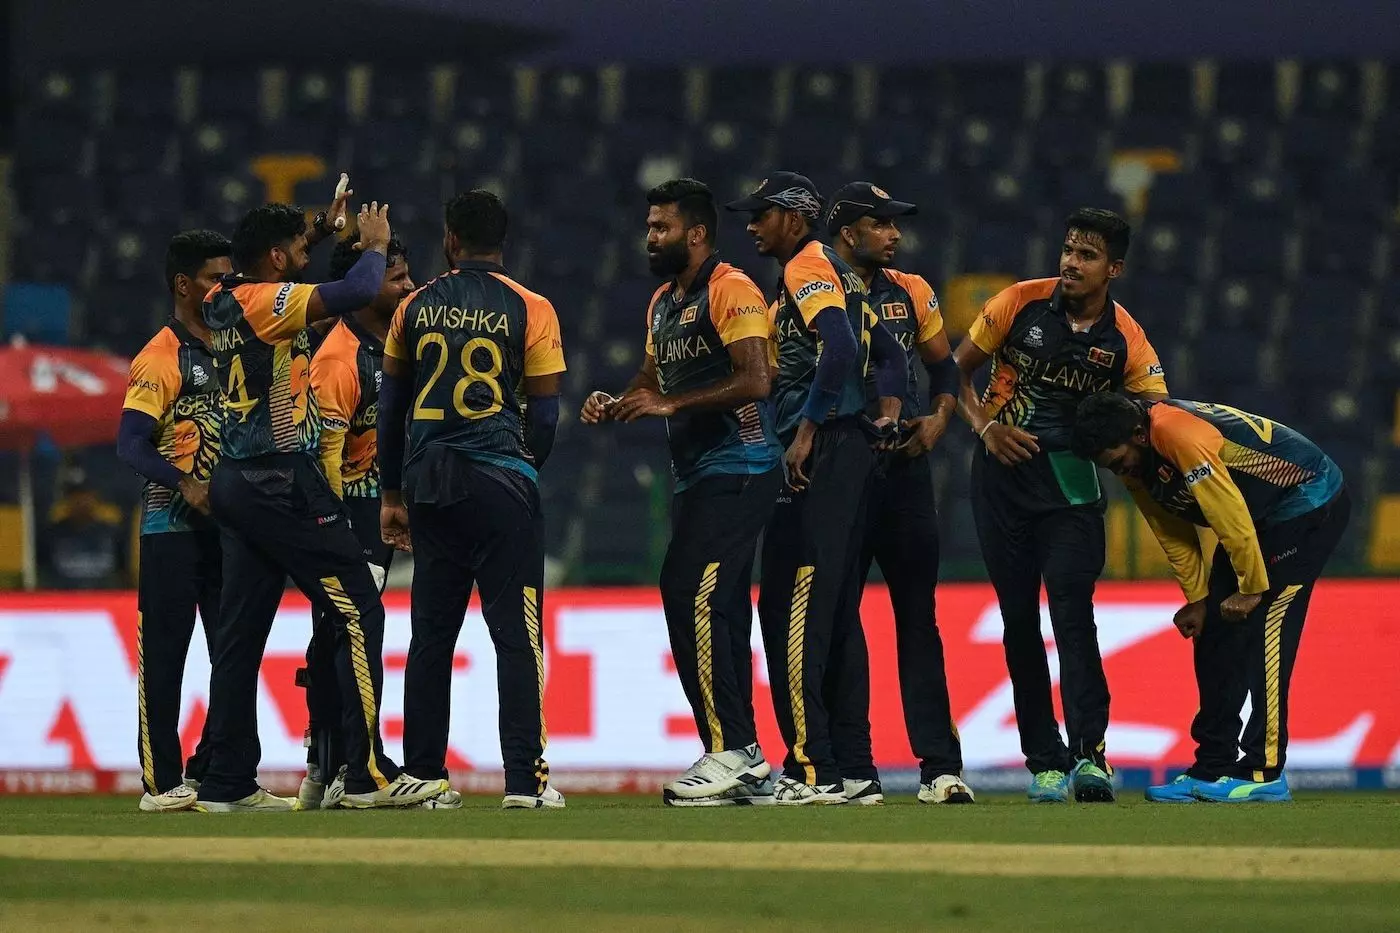 T-20 World Cup: Sri Lanka to take on Australia in their Super 12 match today